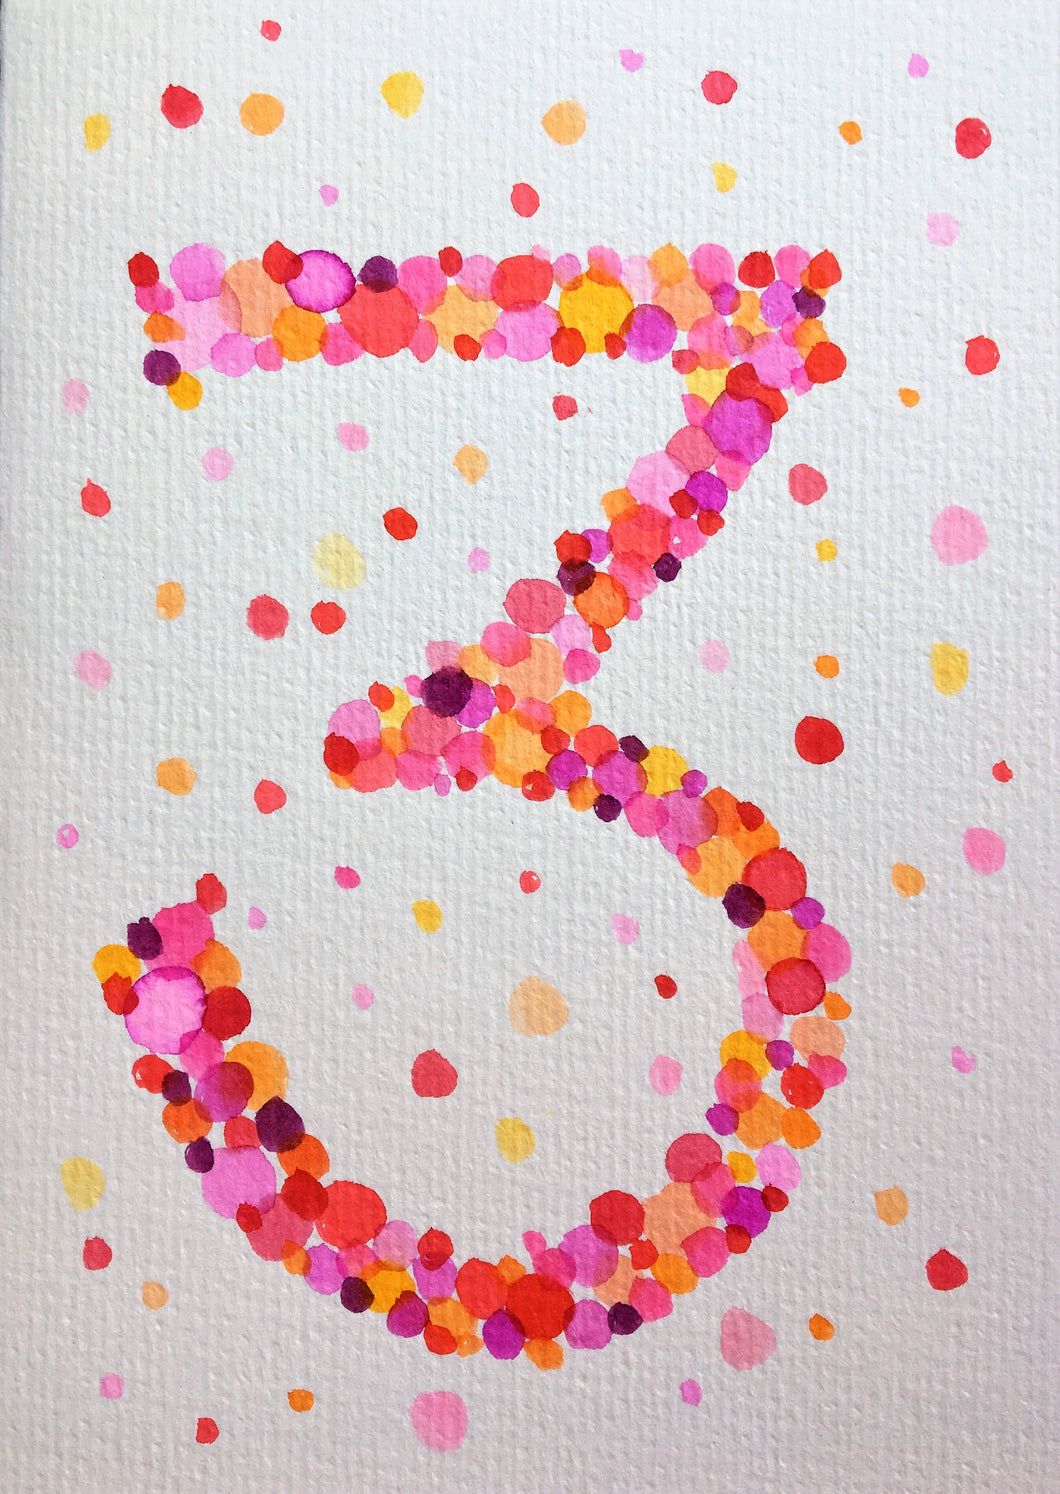 Hand-painted greeting card - 3rd Birthday - Pink, red, orange and purple bubbles - eDgE dEsiGn London